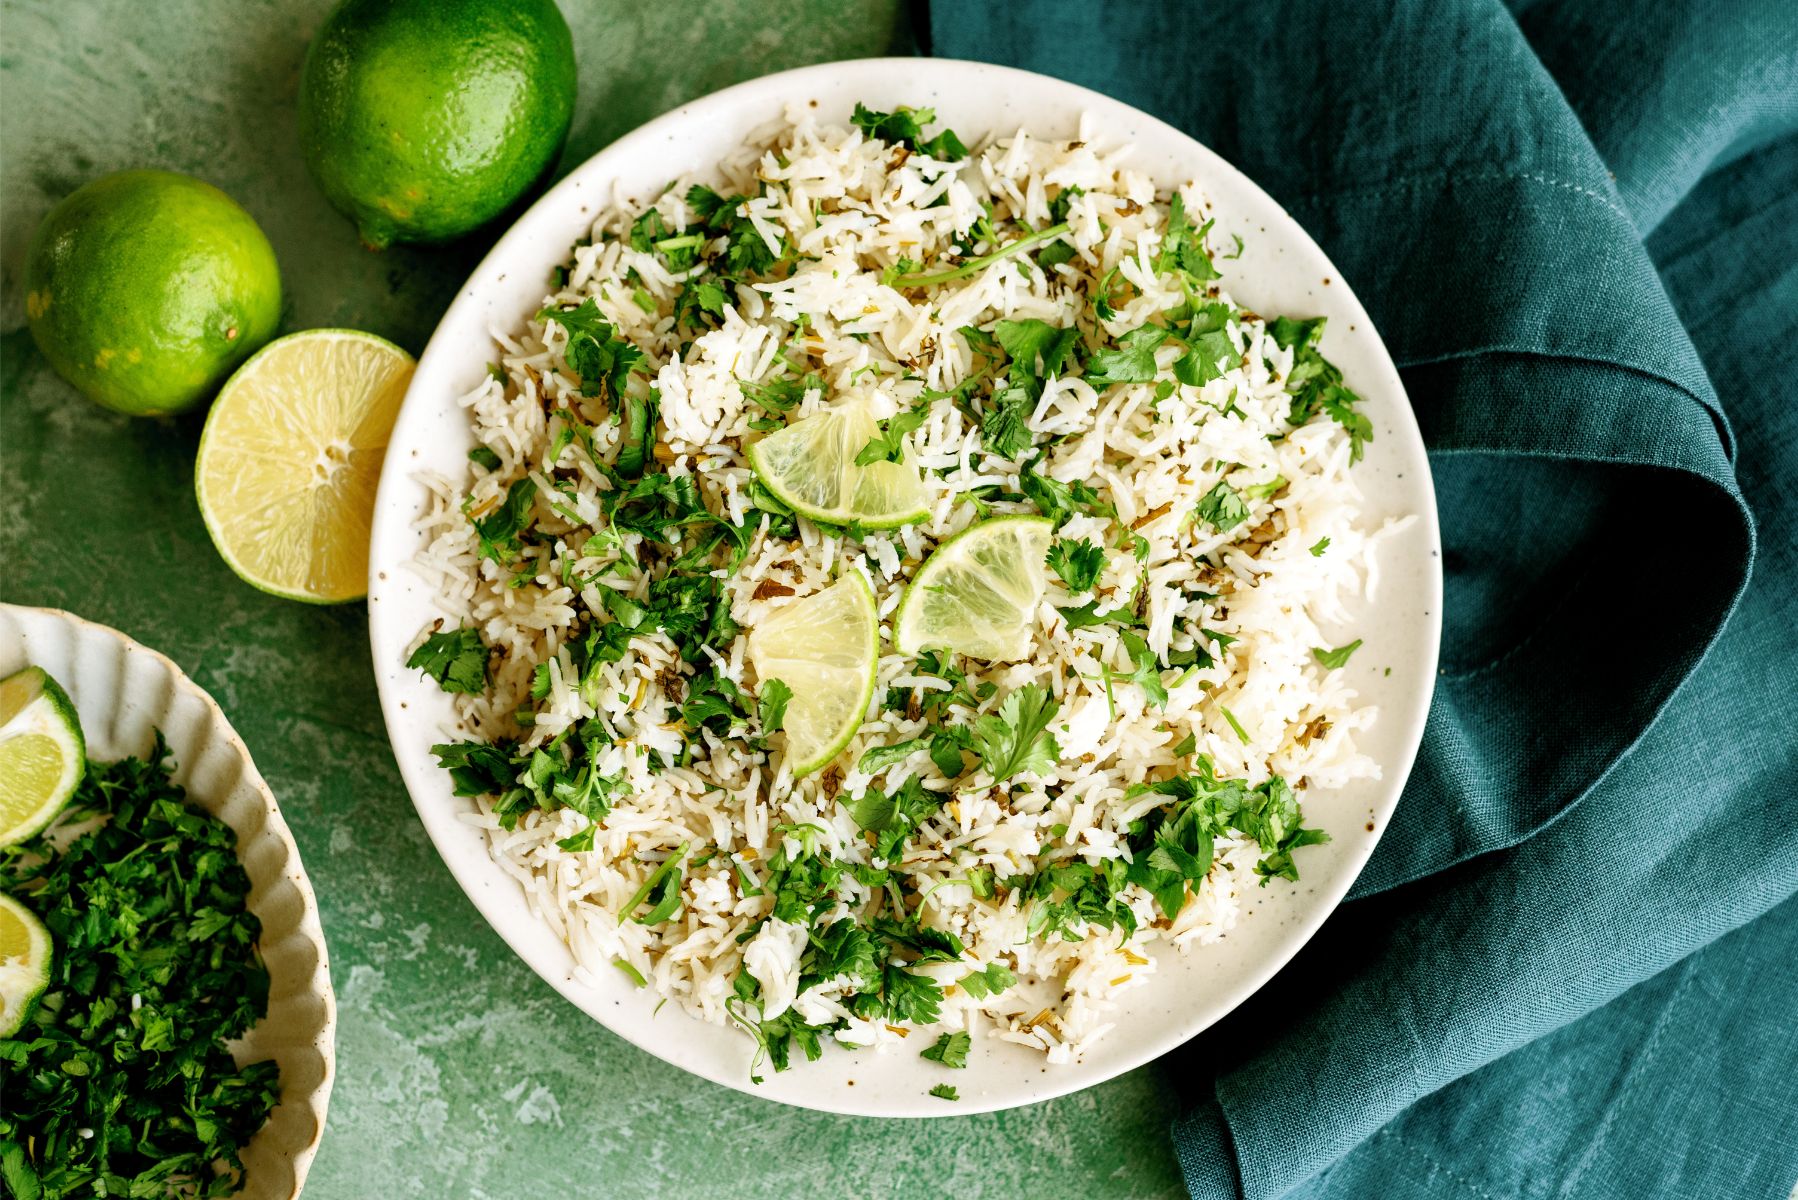 Top view of a plate of Instant Pot Cilantro Lime Rice with limes